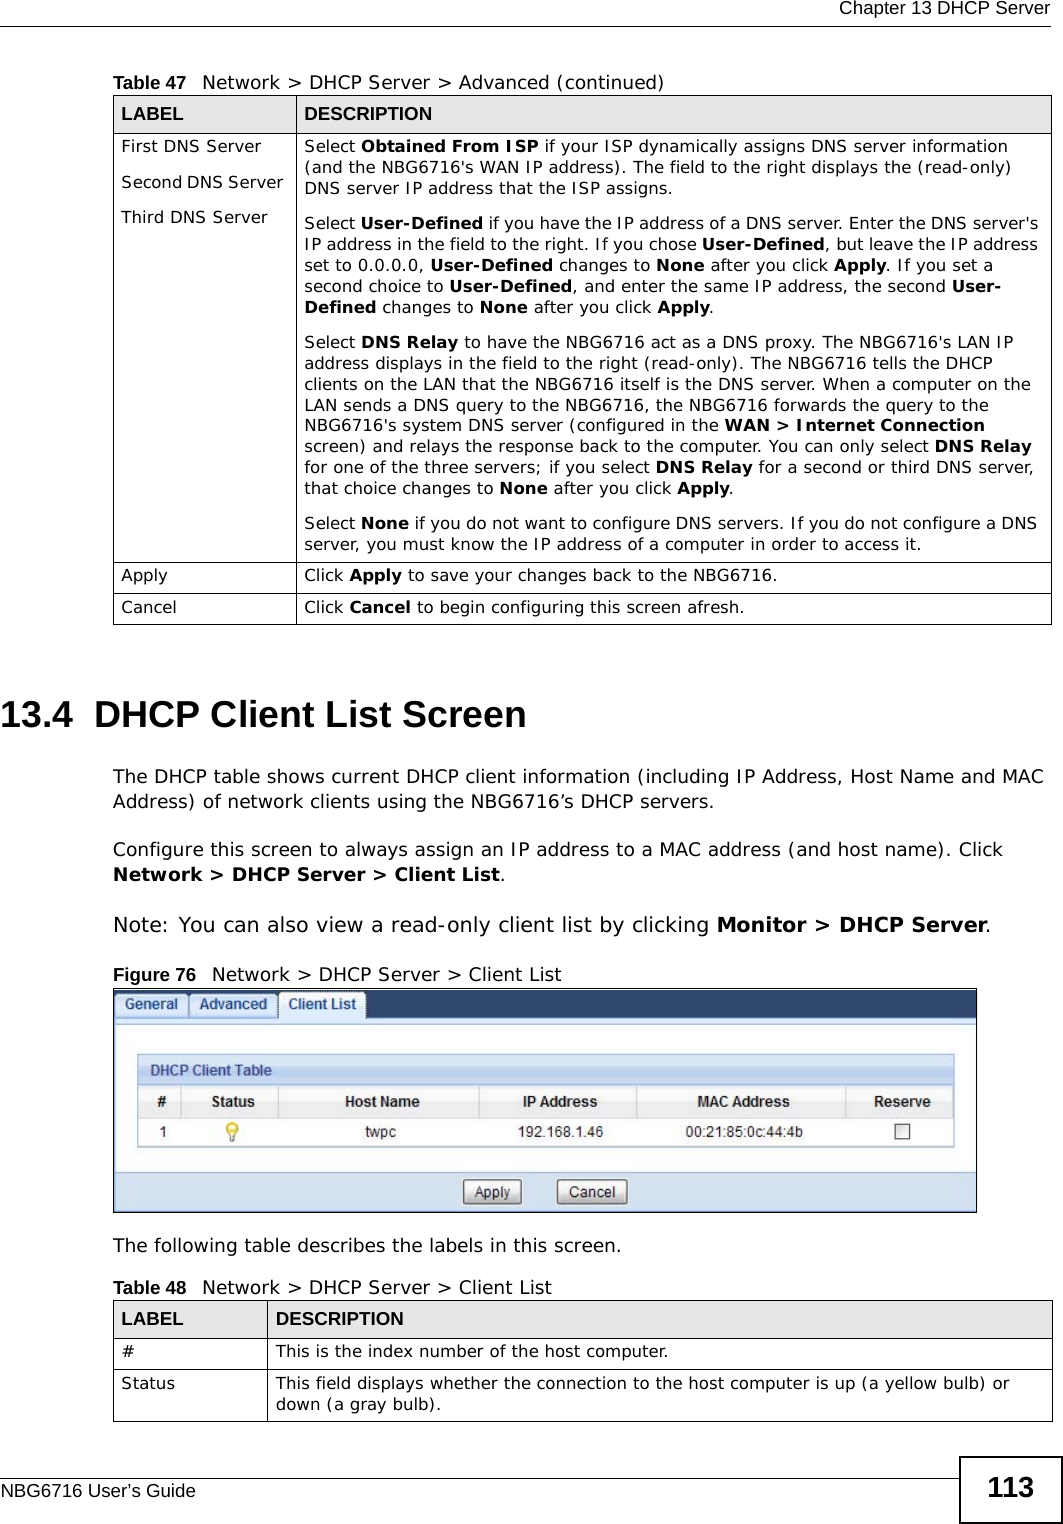  Chapter 13 DHCP ServerNBG6716 User’s Guide 11313.4  DHCP Client List ScreenThe DHCP table shows current DHCP client information (including IP Address, Host Name and MAC Address) of network clients using the NBG6716’s DHCP servers.Configure this screen to always assign an IP address to a MAC address (and host name). Click Network &gt; DHCP Server &gt; Client List. Note: You can also view a read-only client list by clicking Monitor &gt; DHCP Server. Figure 76   Network &gt; DHCP Server &gt; Client ListThe following table describes the labels in this screen.First DNS ServerSecond DNS Server Third DNS ServerSelect Obtained From ISP if your ISP dynamically assigns DNS server information (and the NBG6716&apos;s WAN IP address). The field to the right displays the (read-only) DNS server IP address that the ISP assigns. Select User-Defined if you have the IP address of a DNS server. Enter the DNS server&apos;s IP address in the field to the right. If you chose User-Defined, but leave the IP address set to 0.0.0.0, User-Defined changes to None after you click Apply. If you set a second choice to User-Defined, and enter the same IP address, the second User-Defined changes to None after you click Apply. Select DNS Relay to have the NBG6716 act as a DNS proxy. The NBG6716&apos;s LAN IP address displays in the field to the right (read-only). The NBG6716 tells the DHCP clients on the LAN that the NBG6716 itself is the DNS server. When a computer on the LAN sends a DNS query to the NBG6716, the NBG6716 forwards the query to the NBG6716&apos;s system DNS server (configured in the WAN &gt; Internet Connection screen) and relays the response back to the computer. You can only select DNS Relay for one of the three servers; if you select DNS Relay for a second or third DNS server, that choice changes to None after you click Apply. Select None if you do not want to configure DNS servers. If you do not configure a DNS server, you must know the IP address of a computer in order to access it.Apply Click Apply to save your changes back to the NBG6716.Cancel Click Cancel to begin configuring this screen afresh.Table 47   Network &gt; DHCP Server &gt; Advanced (continued)LABEL DESCRIPTIONTable 48   Network &gt; DHCP Server &gt; Client ListLABEL  DESCRIPTION#  This is the index number of the host computer.Status This field displays whether the connection to the host computer is up (a yellow bulb) or down (a gray bulb).